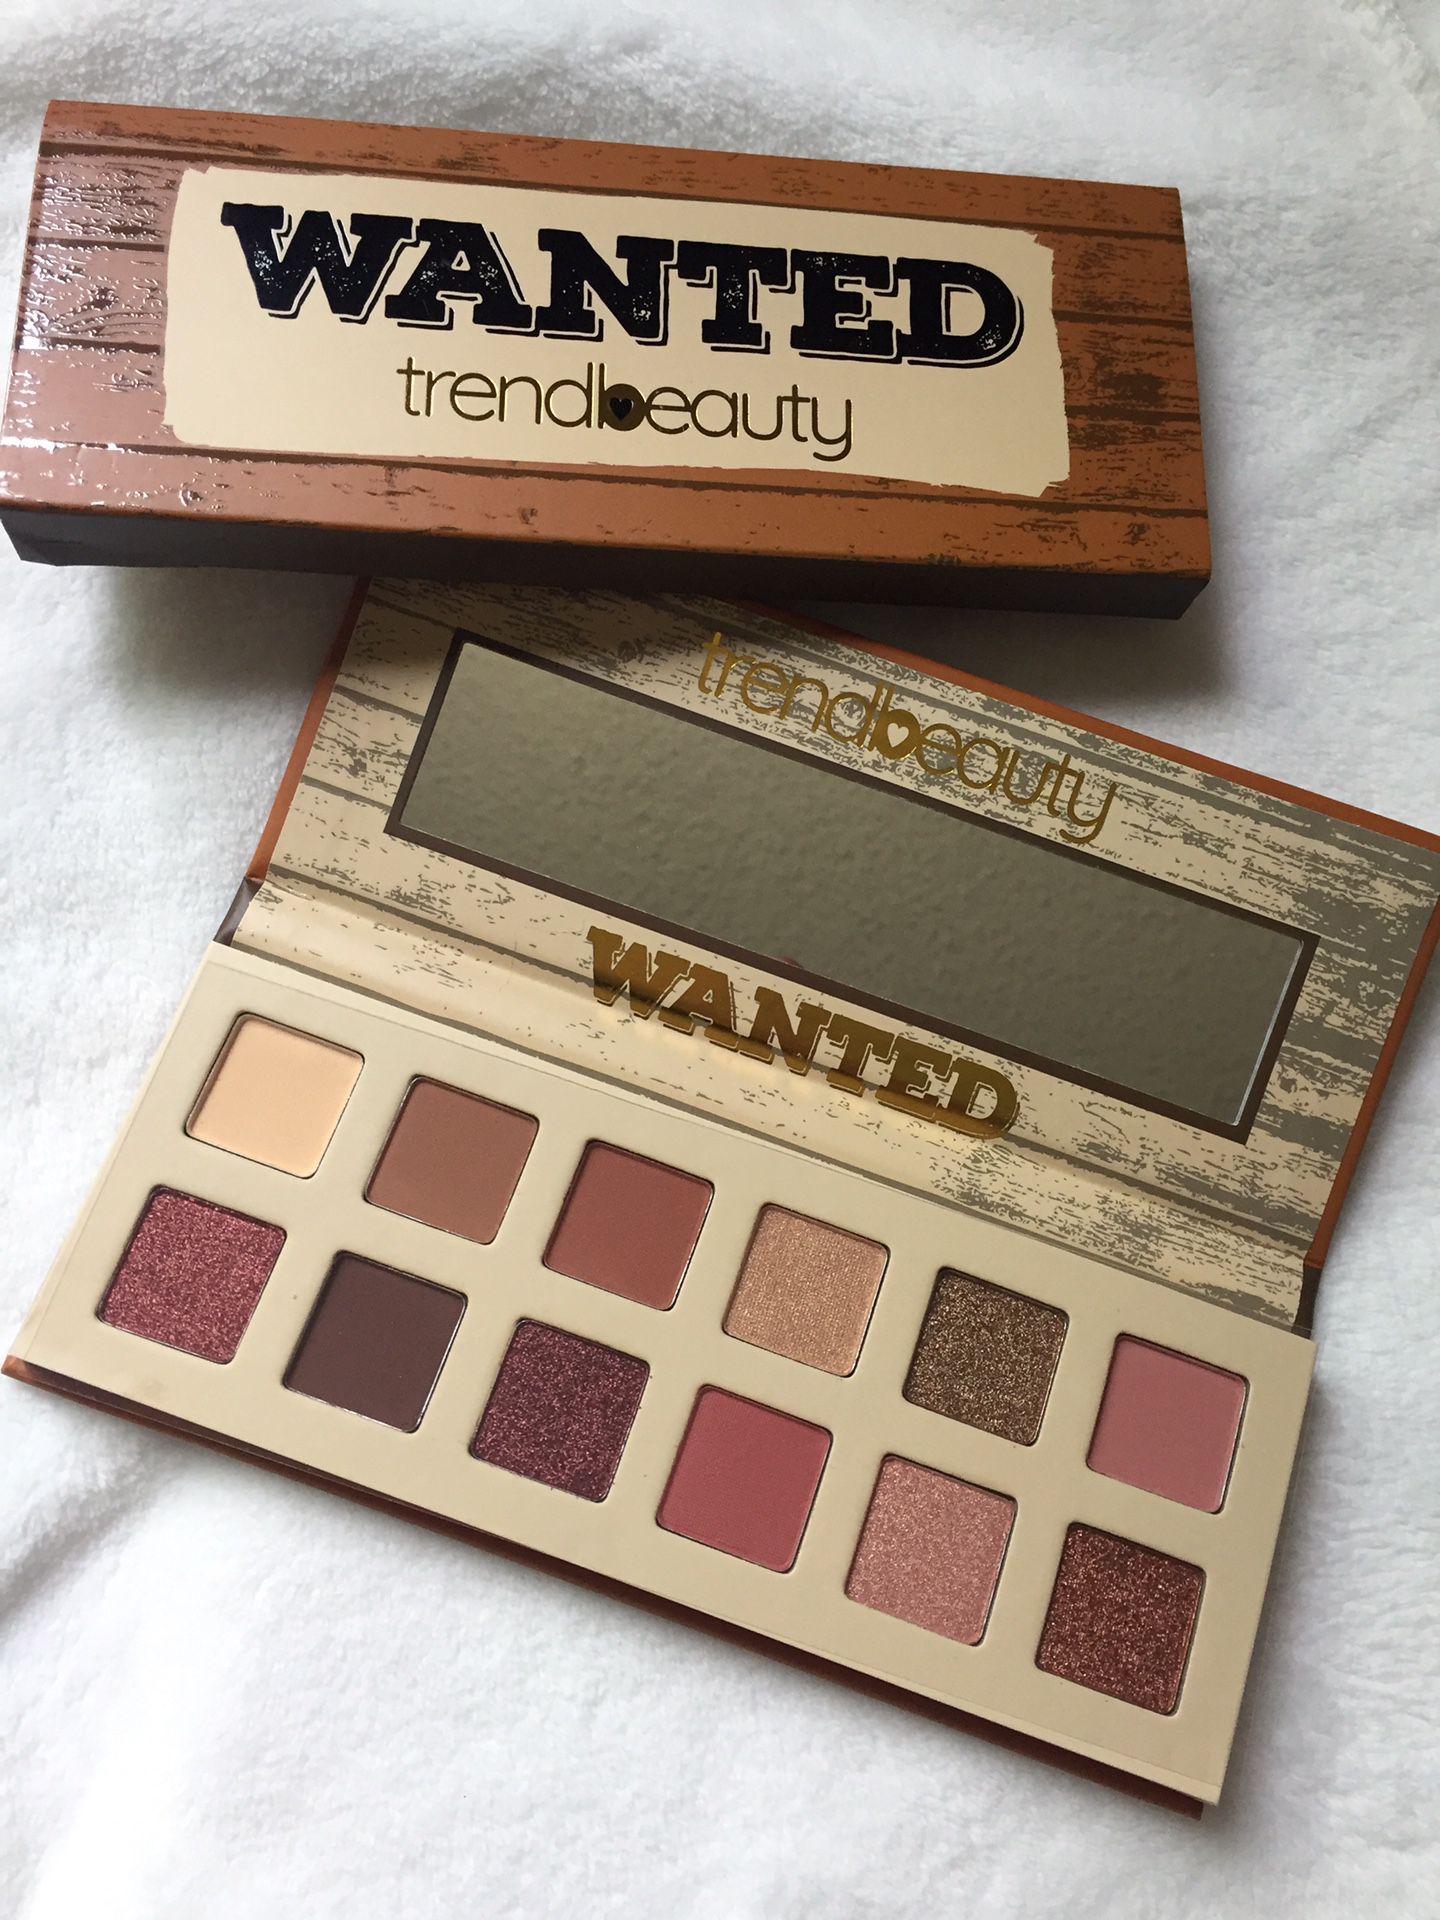 Trend Beauty Wanted